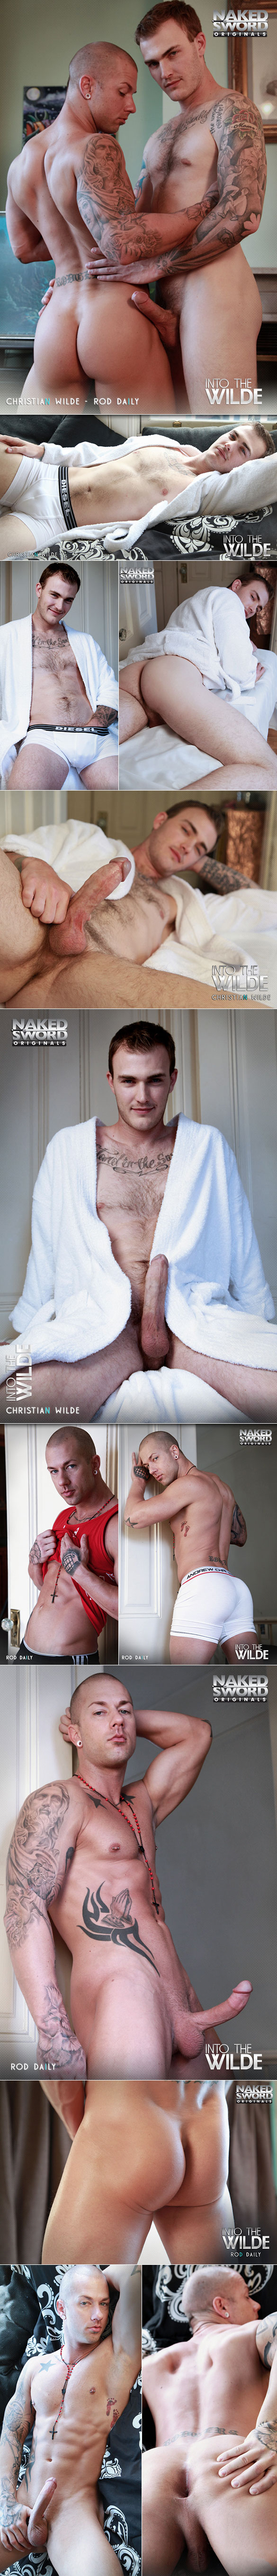 Naked Sword Originals: Rod Daily gets fucked by Christian Wilde in “Into The Wilde: Episode 2”